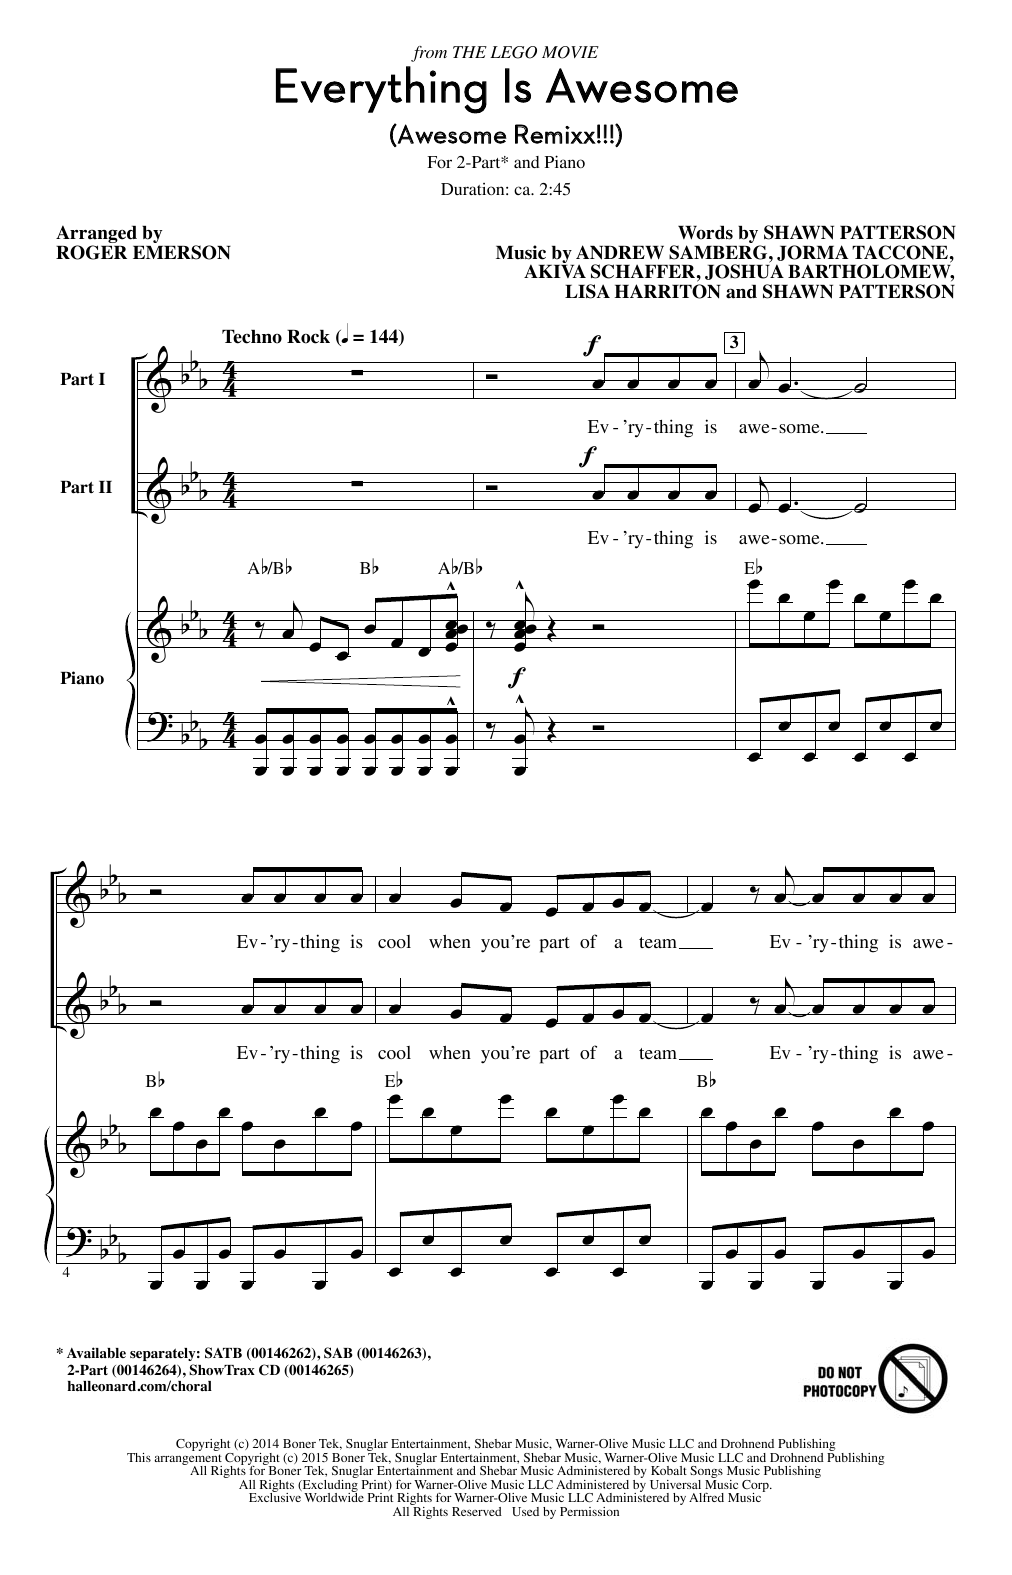 Download Tegan and Sara Everything Is Awesome (Awesome Remixx!! Sheet Music